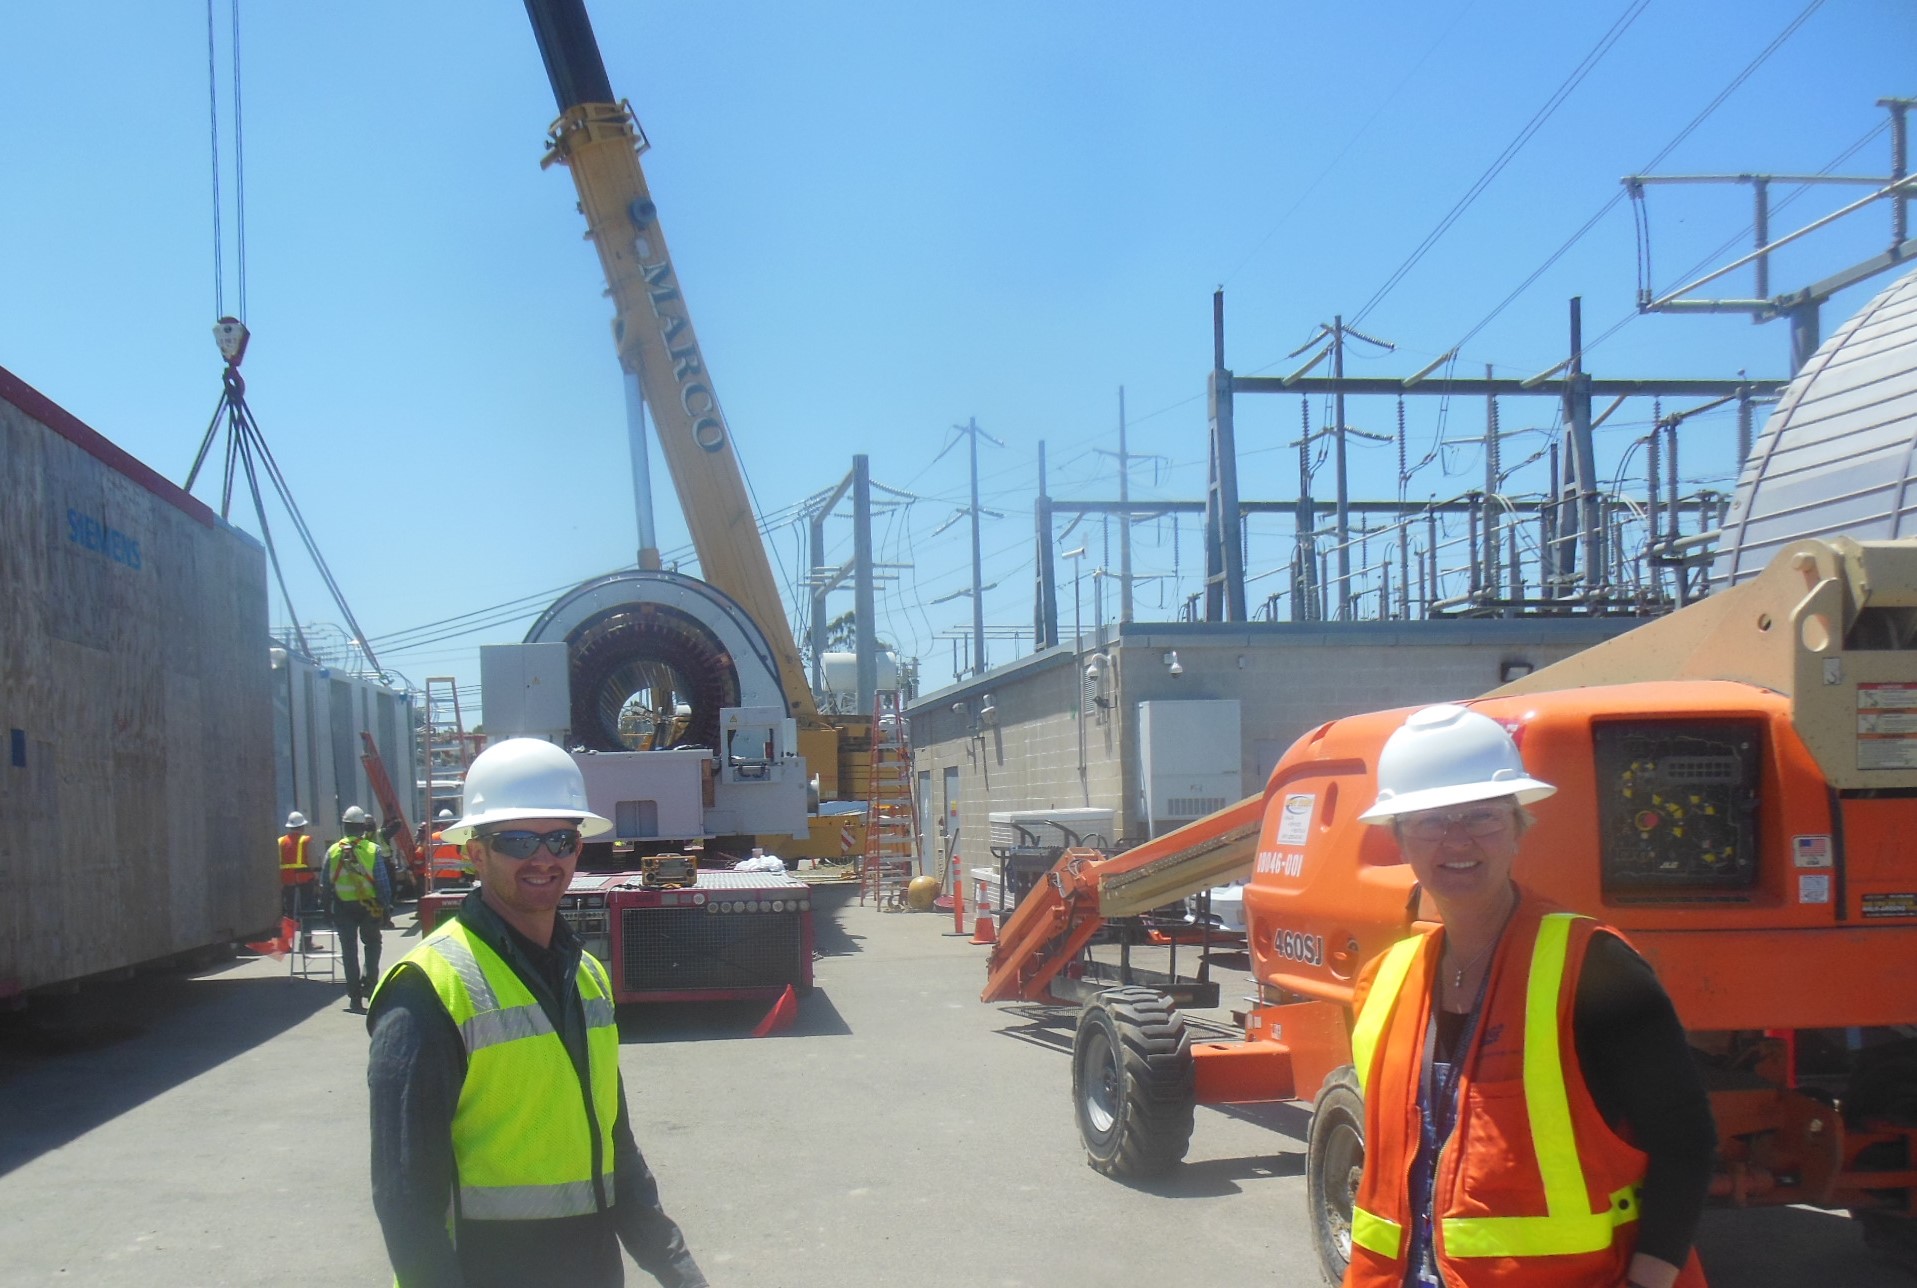 Project specialist T.J. Gates and project manager Irina Petersen standing in front of a synchronous condenser unit at the San Luis Rey substation.